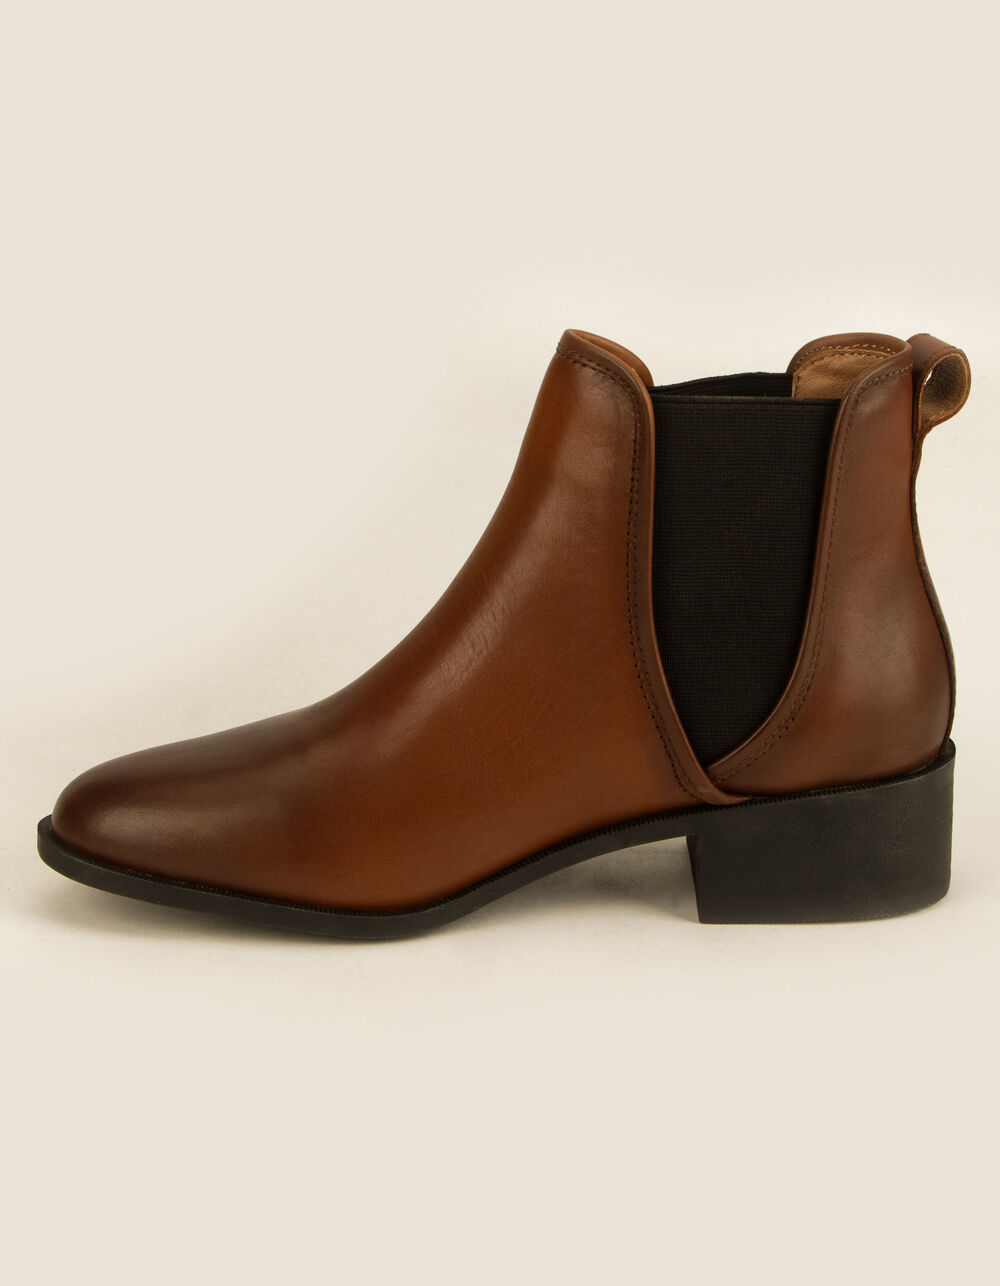 STEVE MADDEN Dares Leather Womens Chelsea Boots - COGNAC | Tillys